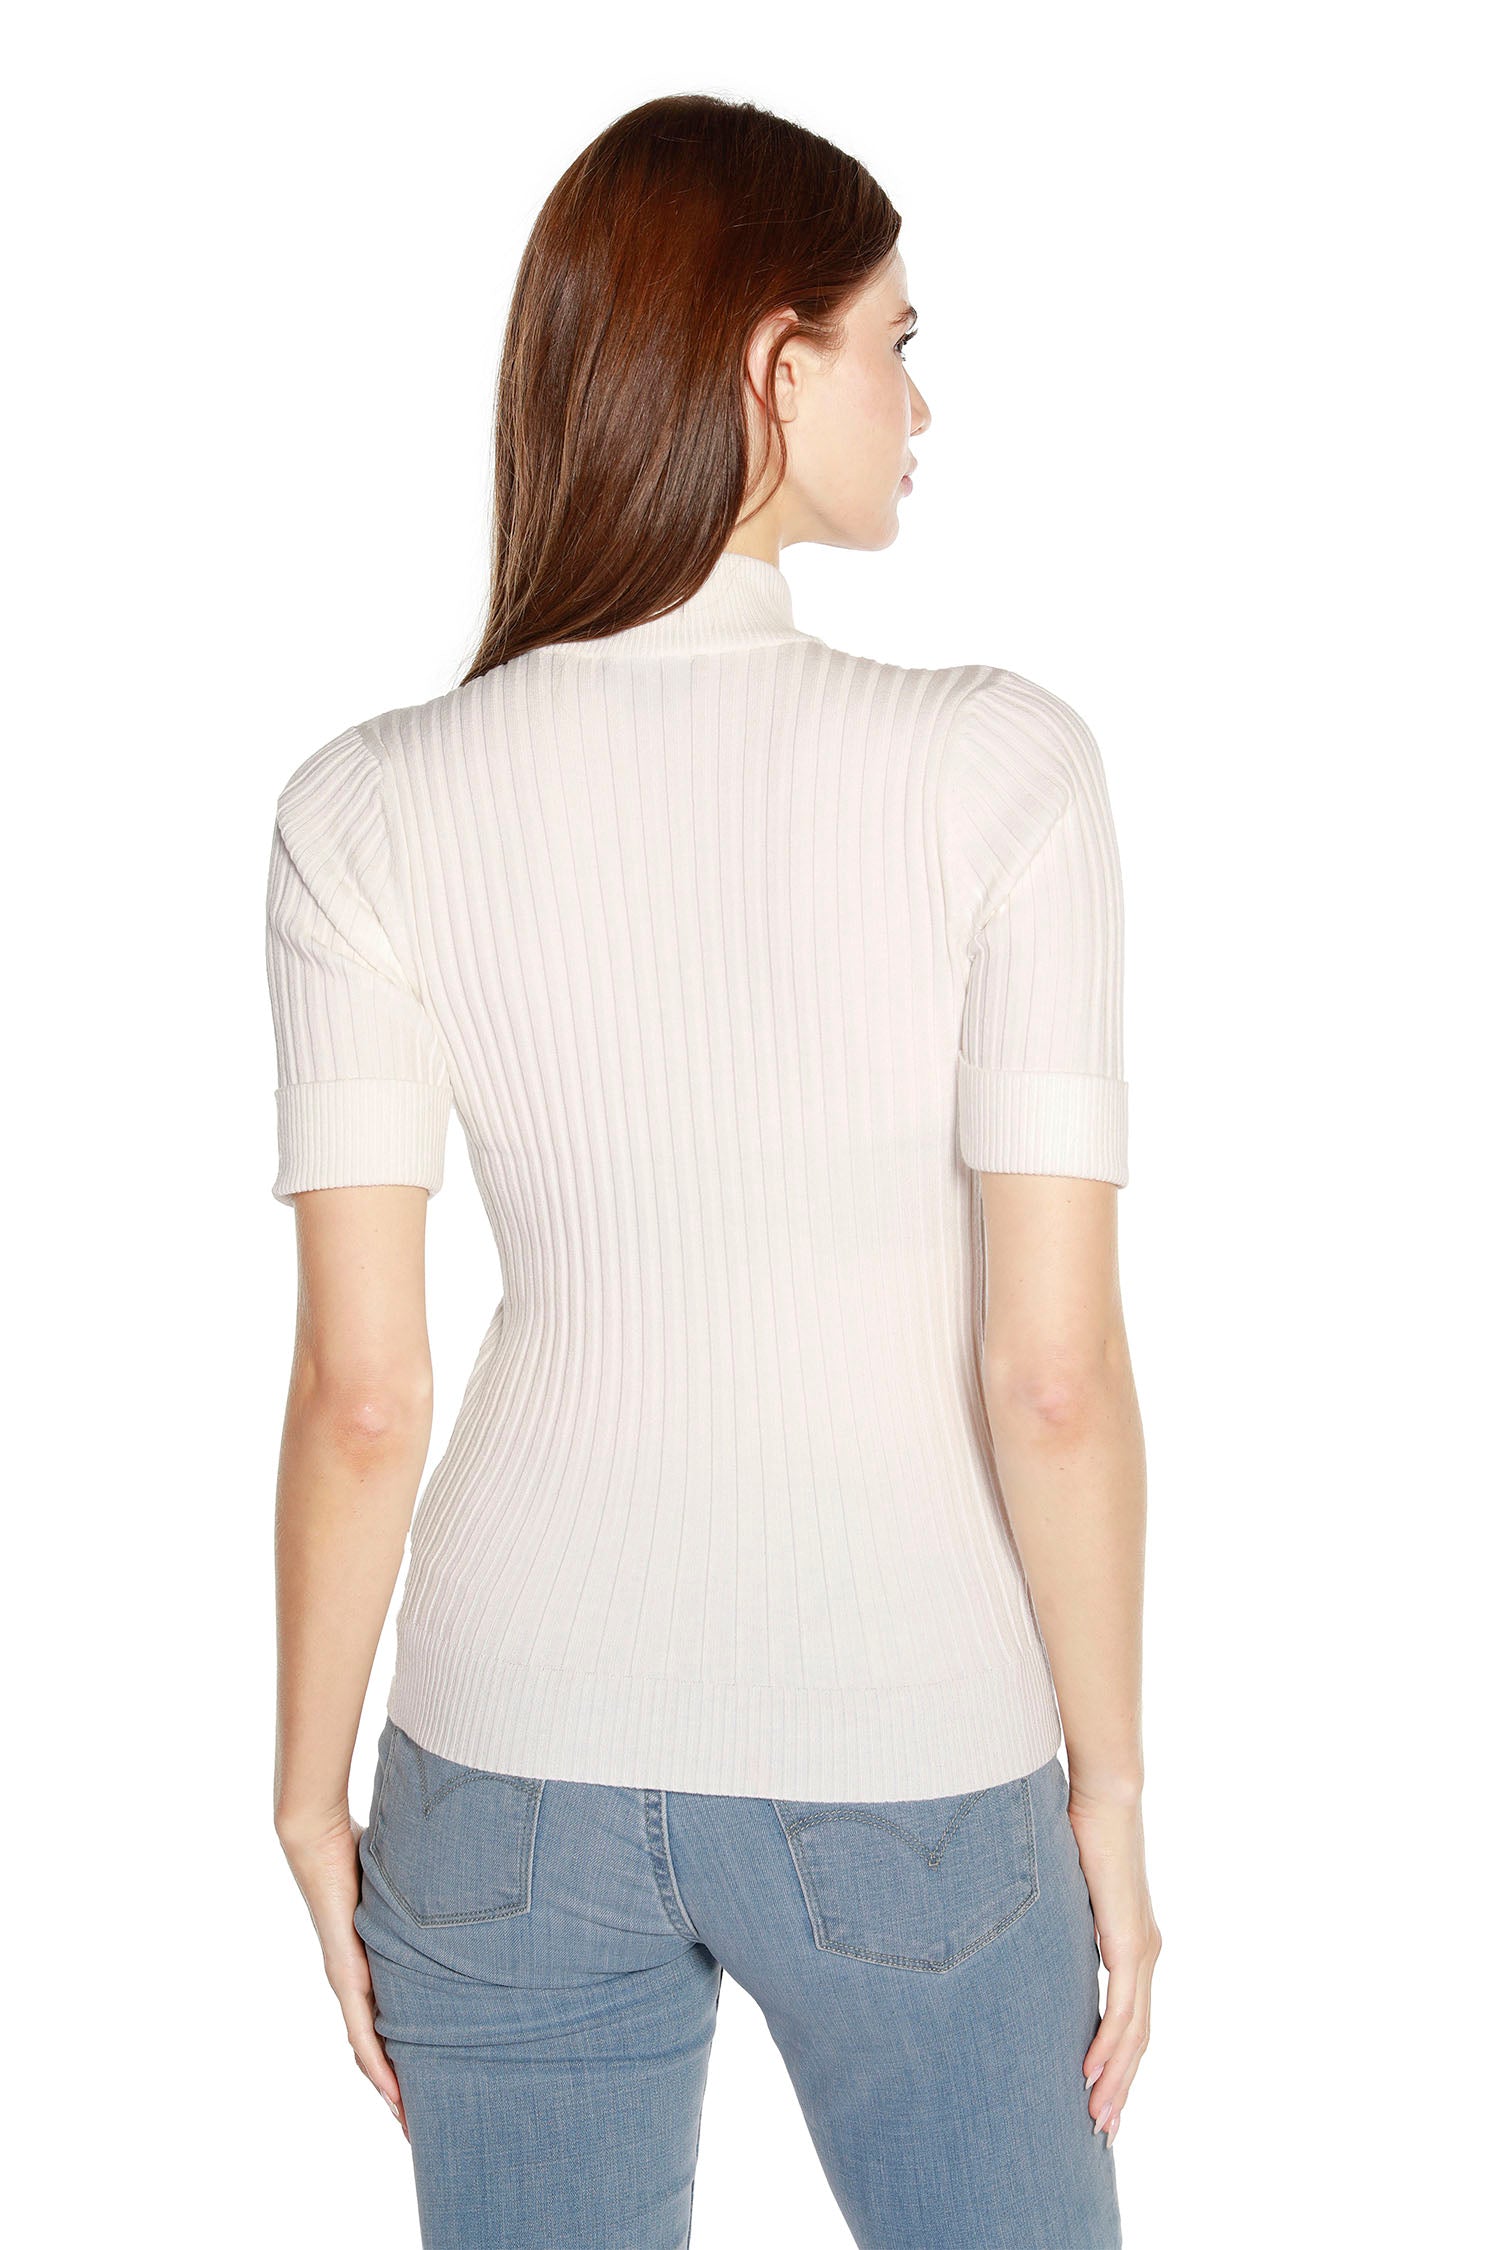 Women's Pullover Sweater Top with Front Quarter Zip in a Ribbed Knit